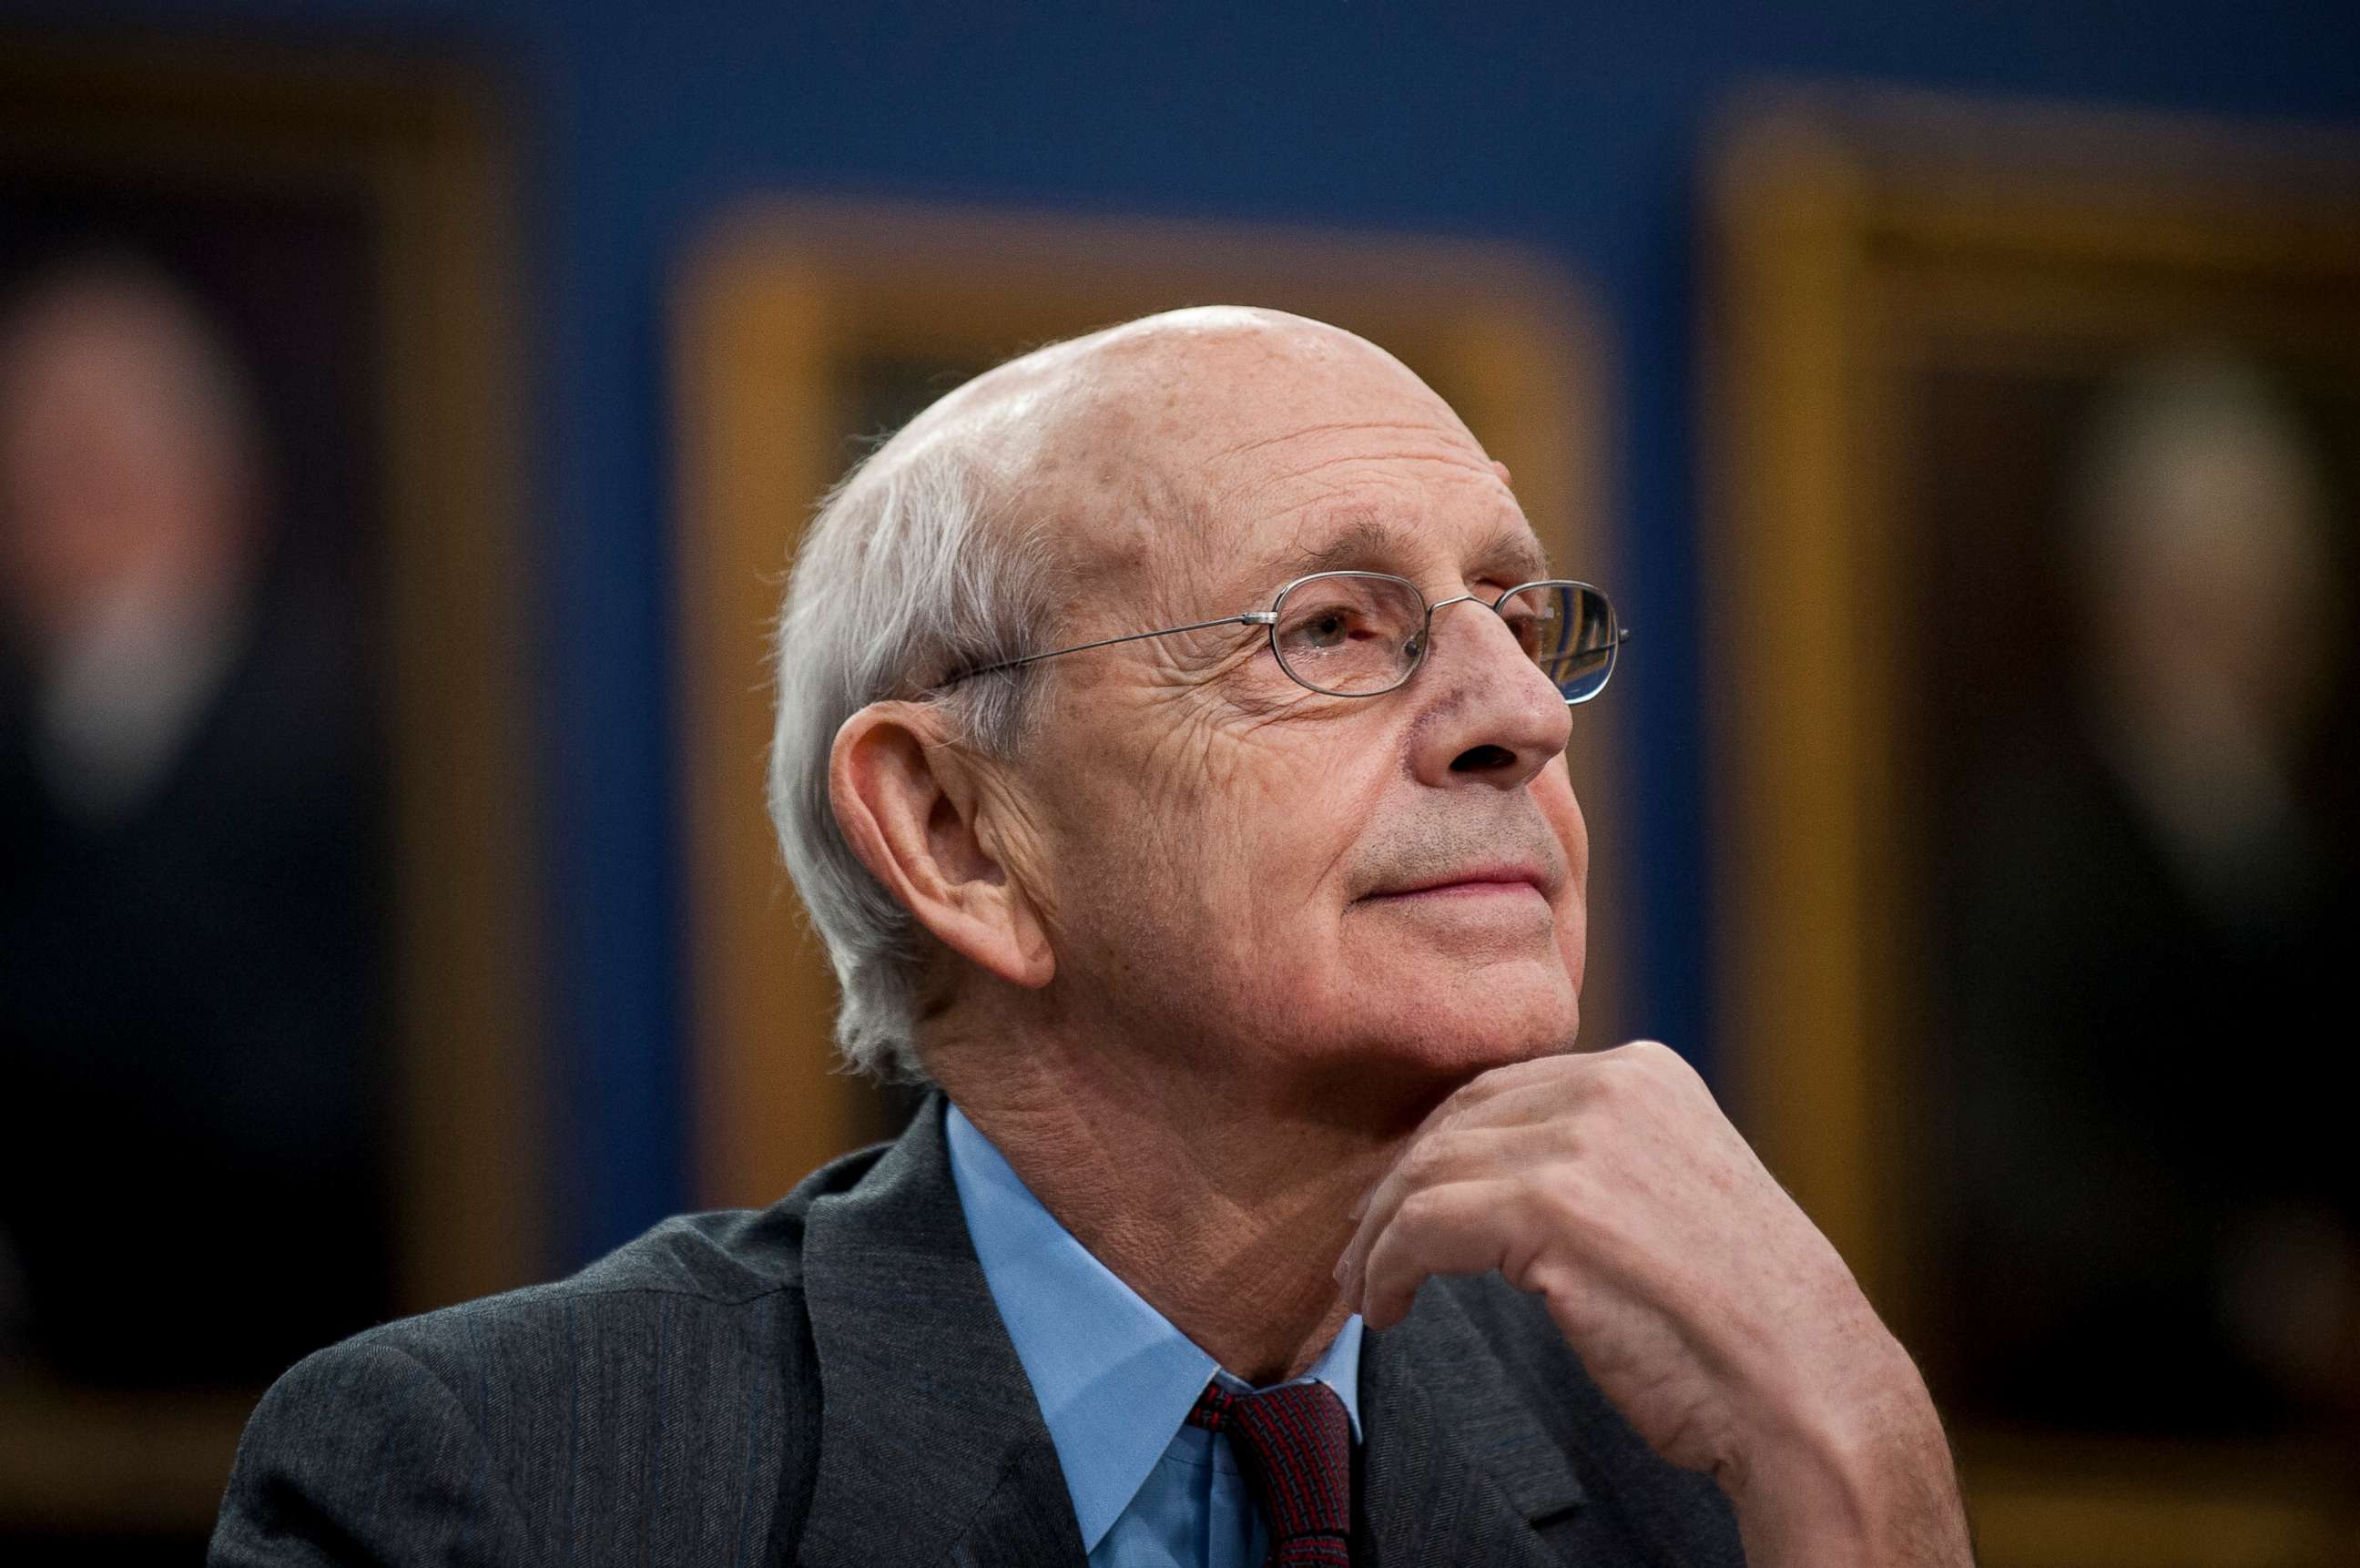 PHOTO: Supreme Court Justice Stephen Breyer listens during a meeting in Washington, March 23, 2015.